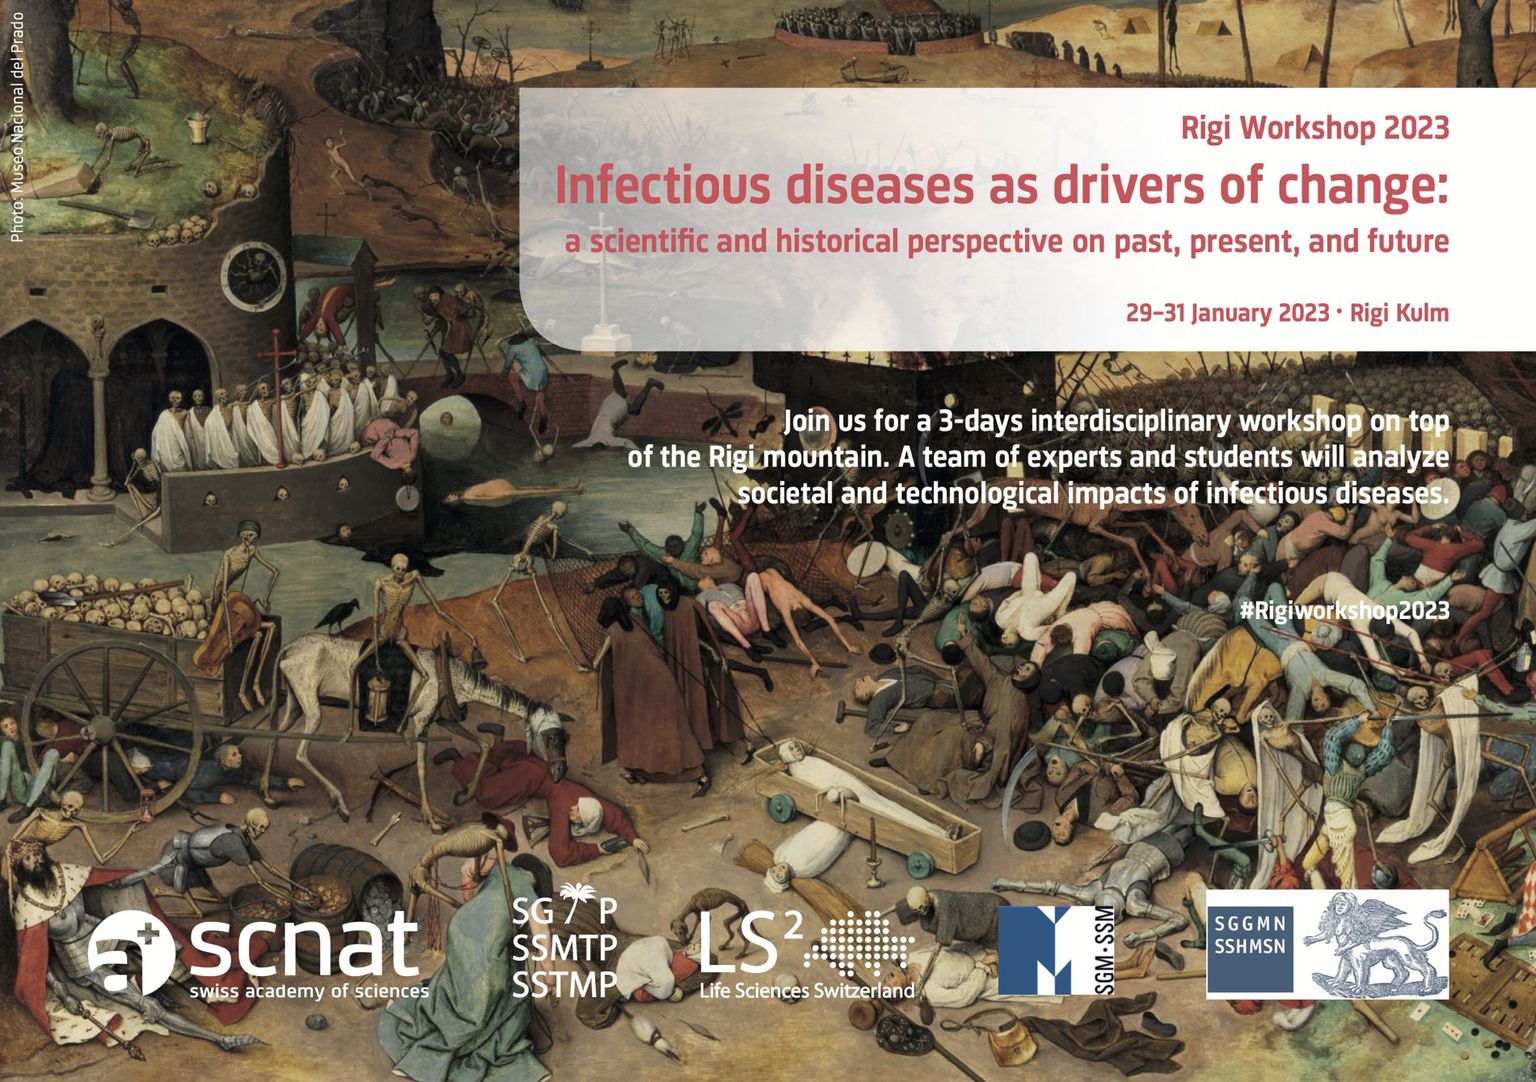 Rigi Workshop 2023 - Infectious Diseases as Drivers of Change